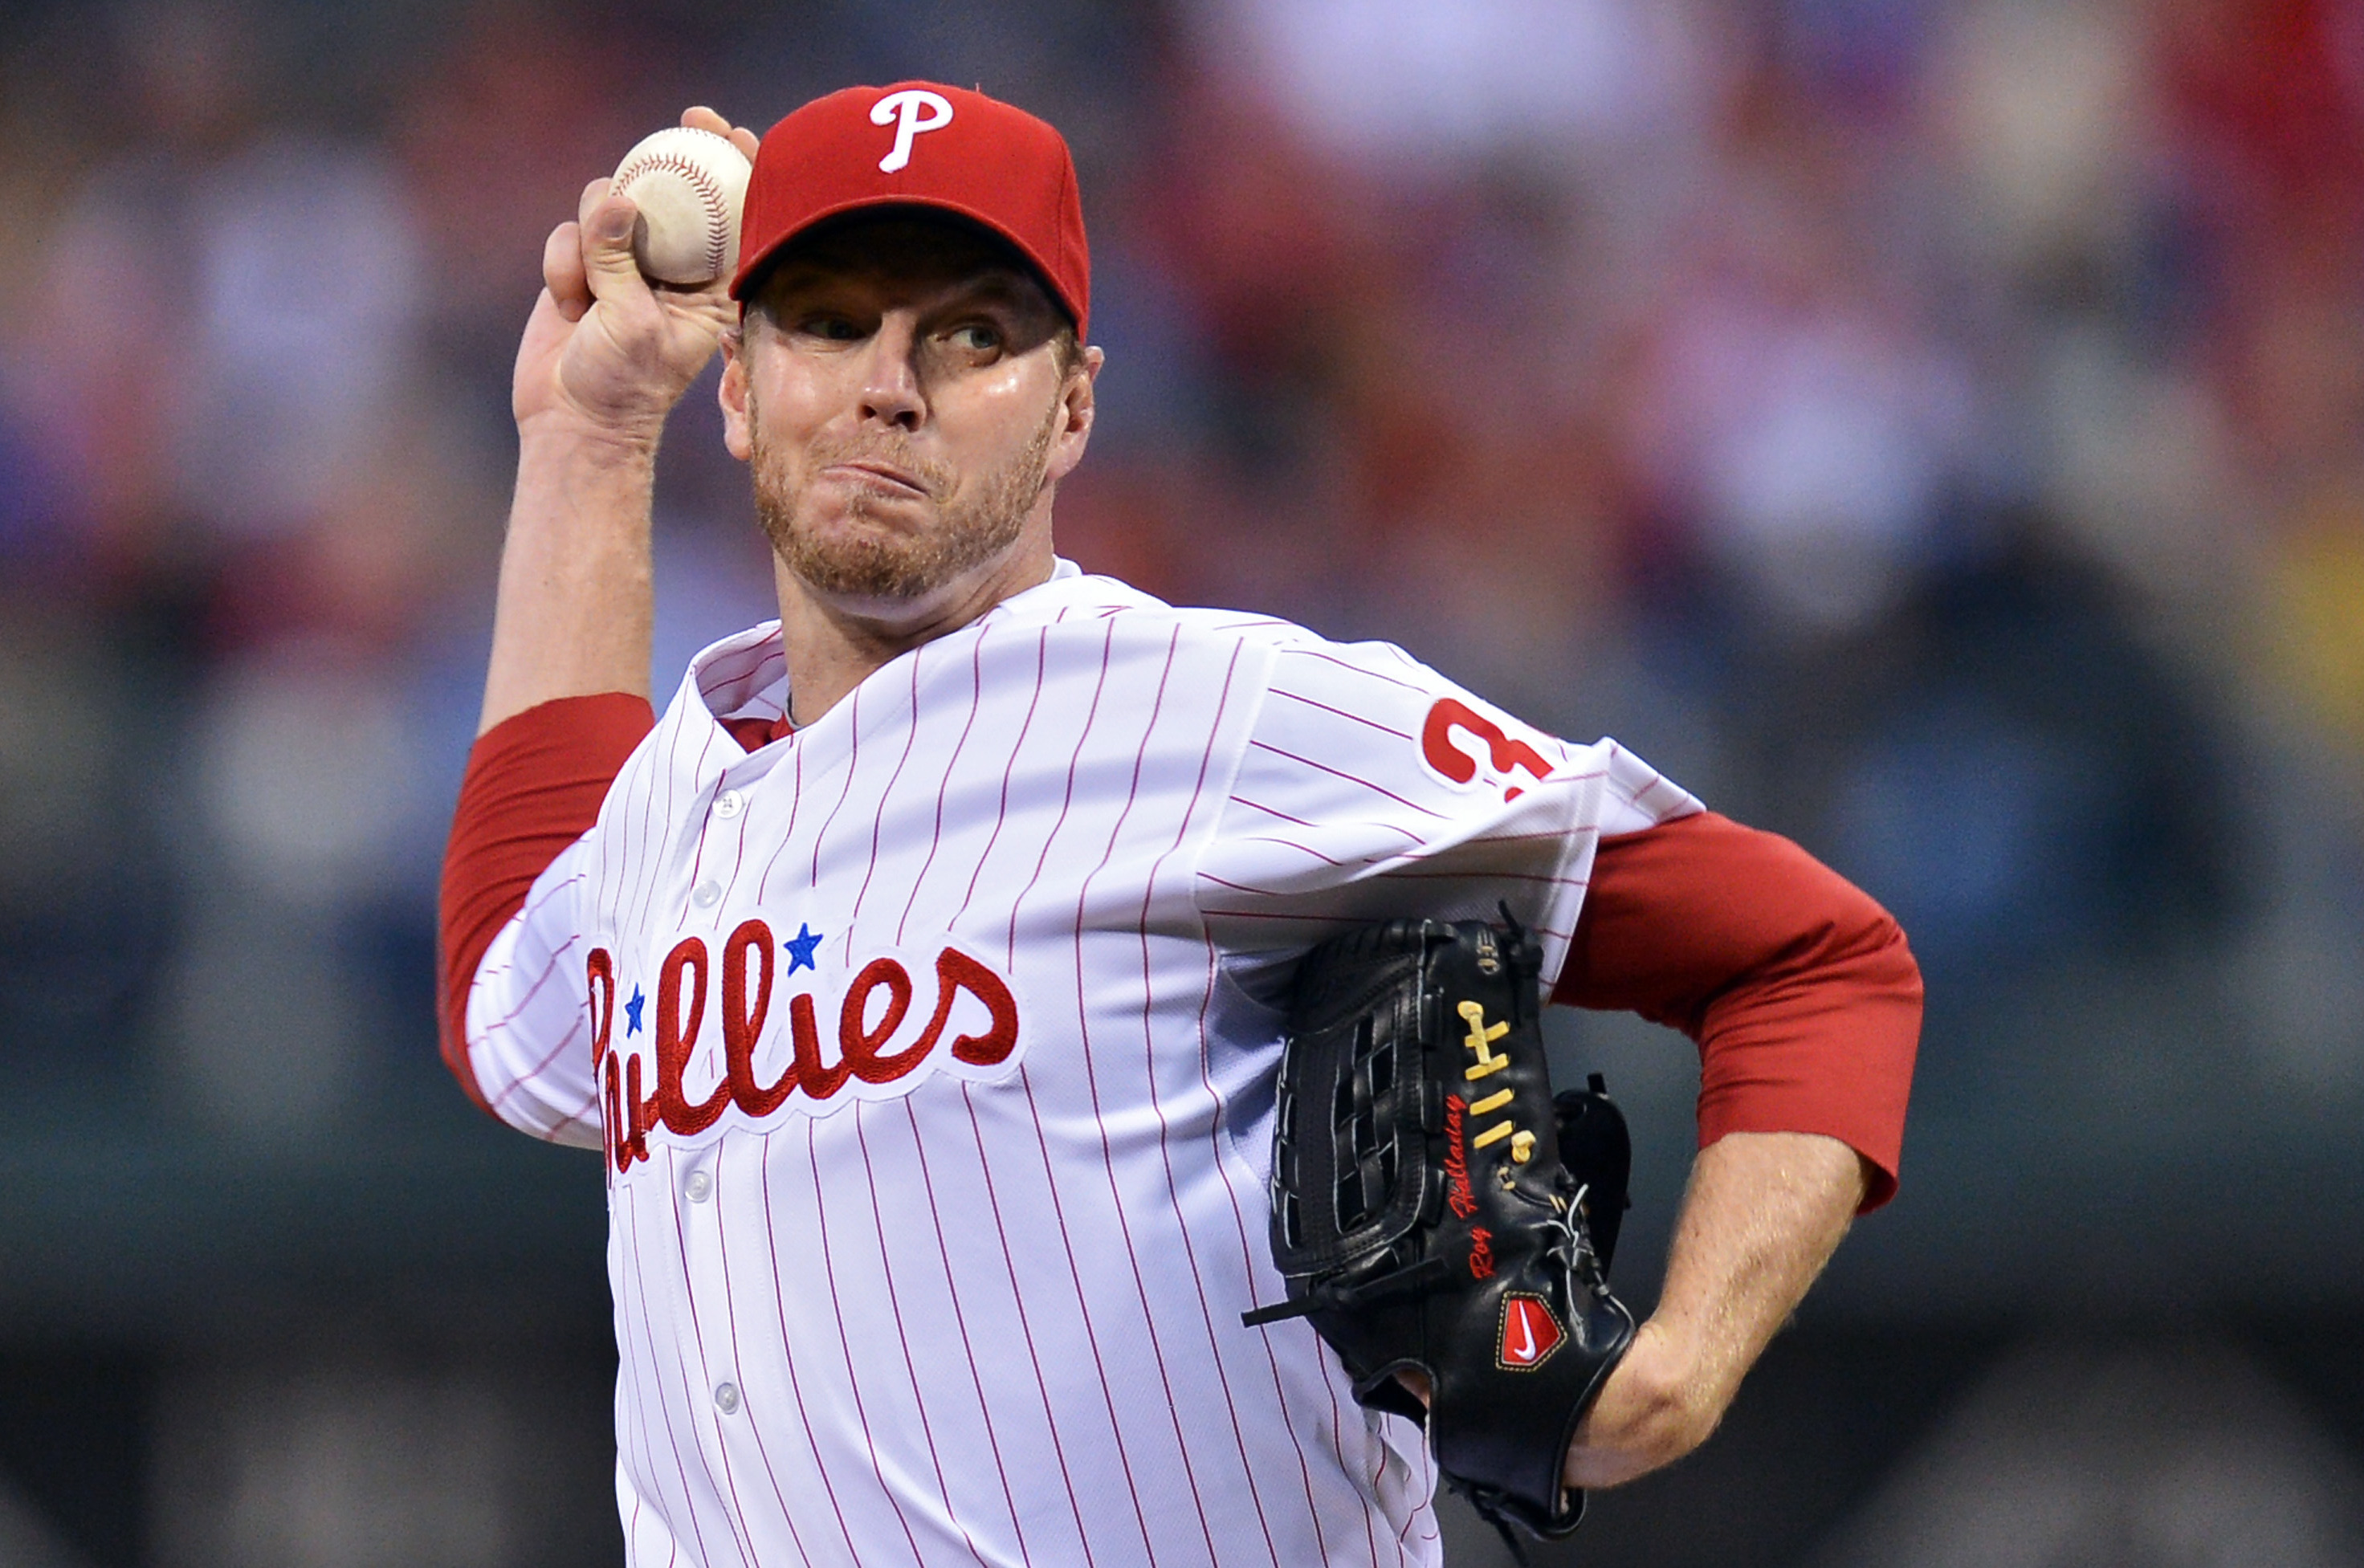 MLB fans react to Roger Clemens' appearance at Phillies training camp